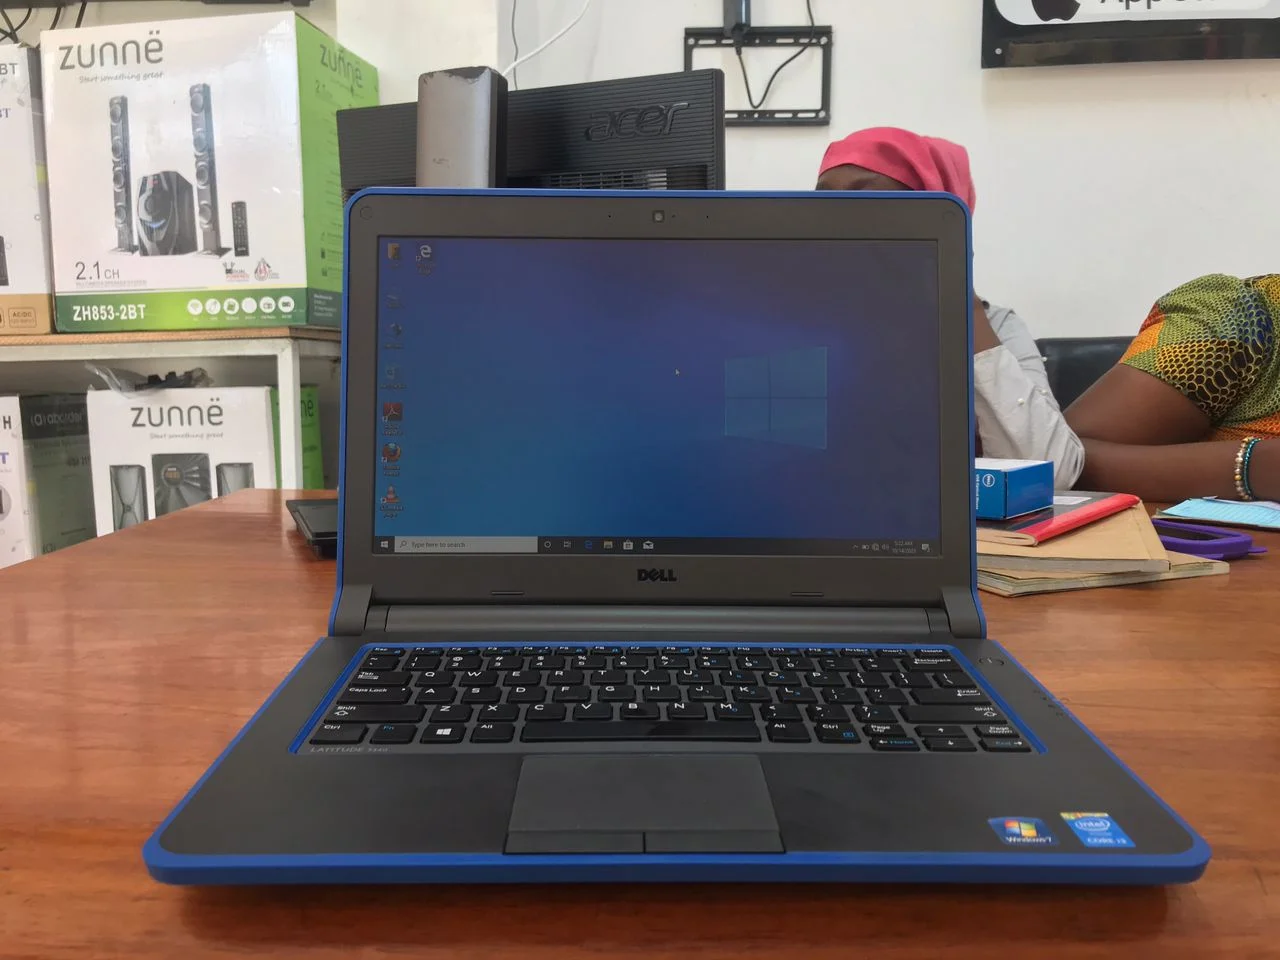 Dell Inter 3340 Corei3 Ram4Gb Disk500 1.70Ghz 13.3 Inch 3Hours